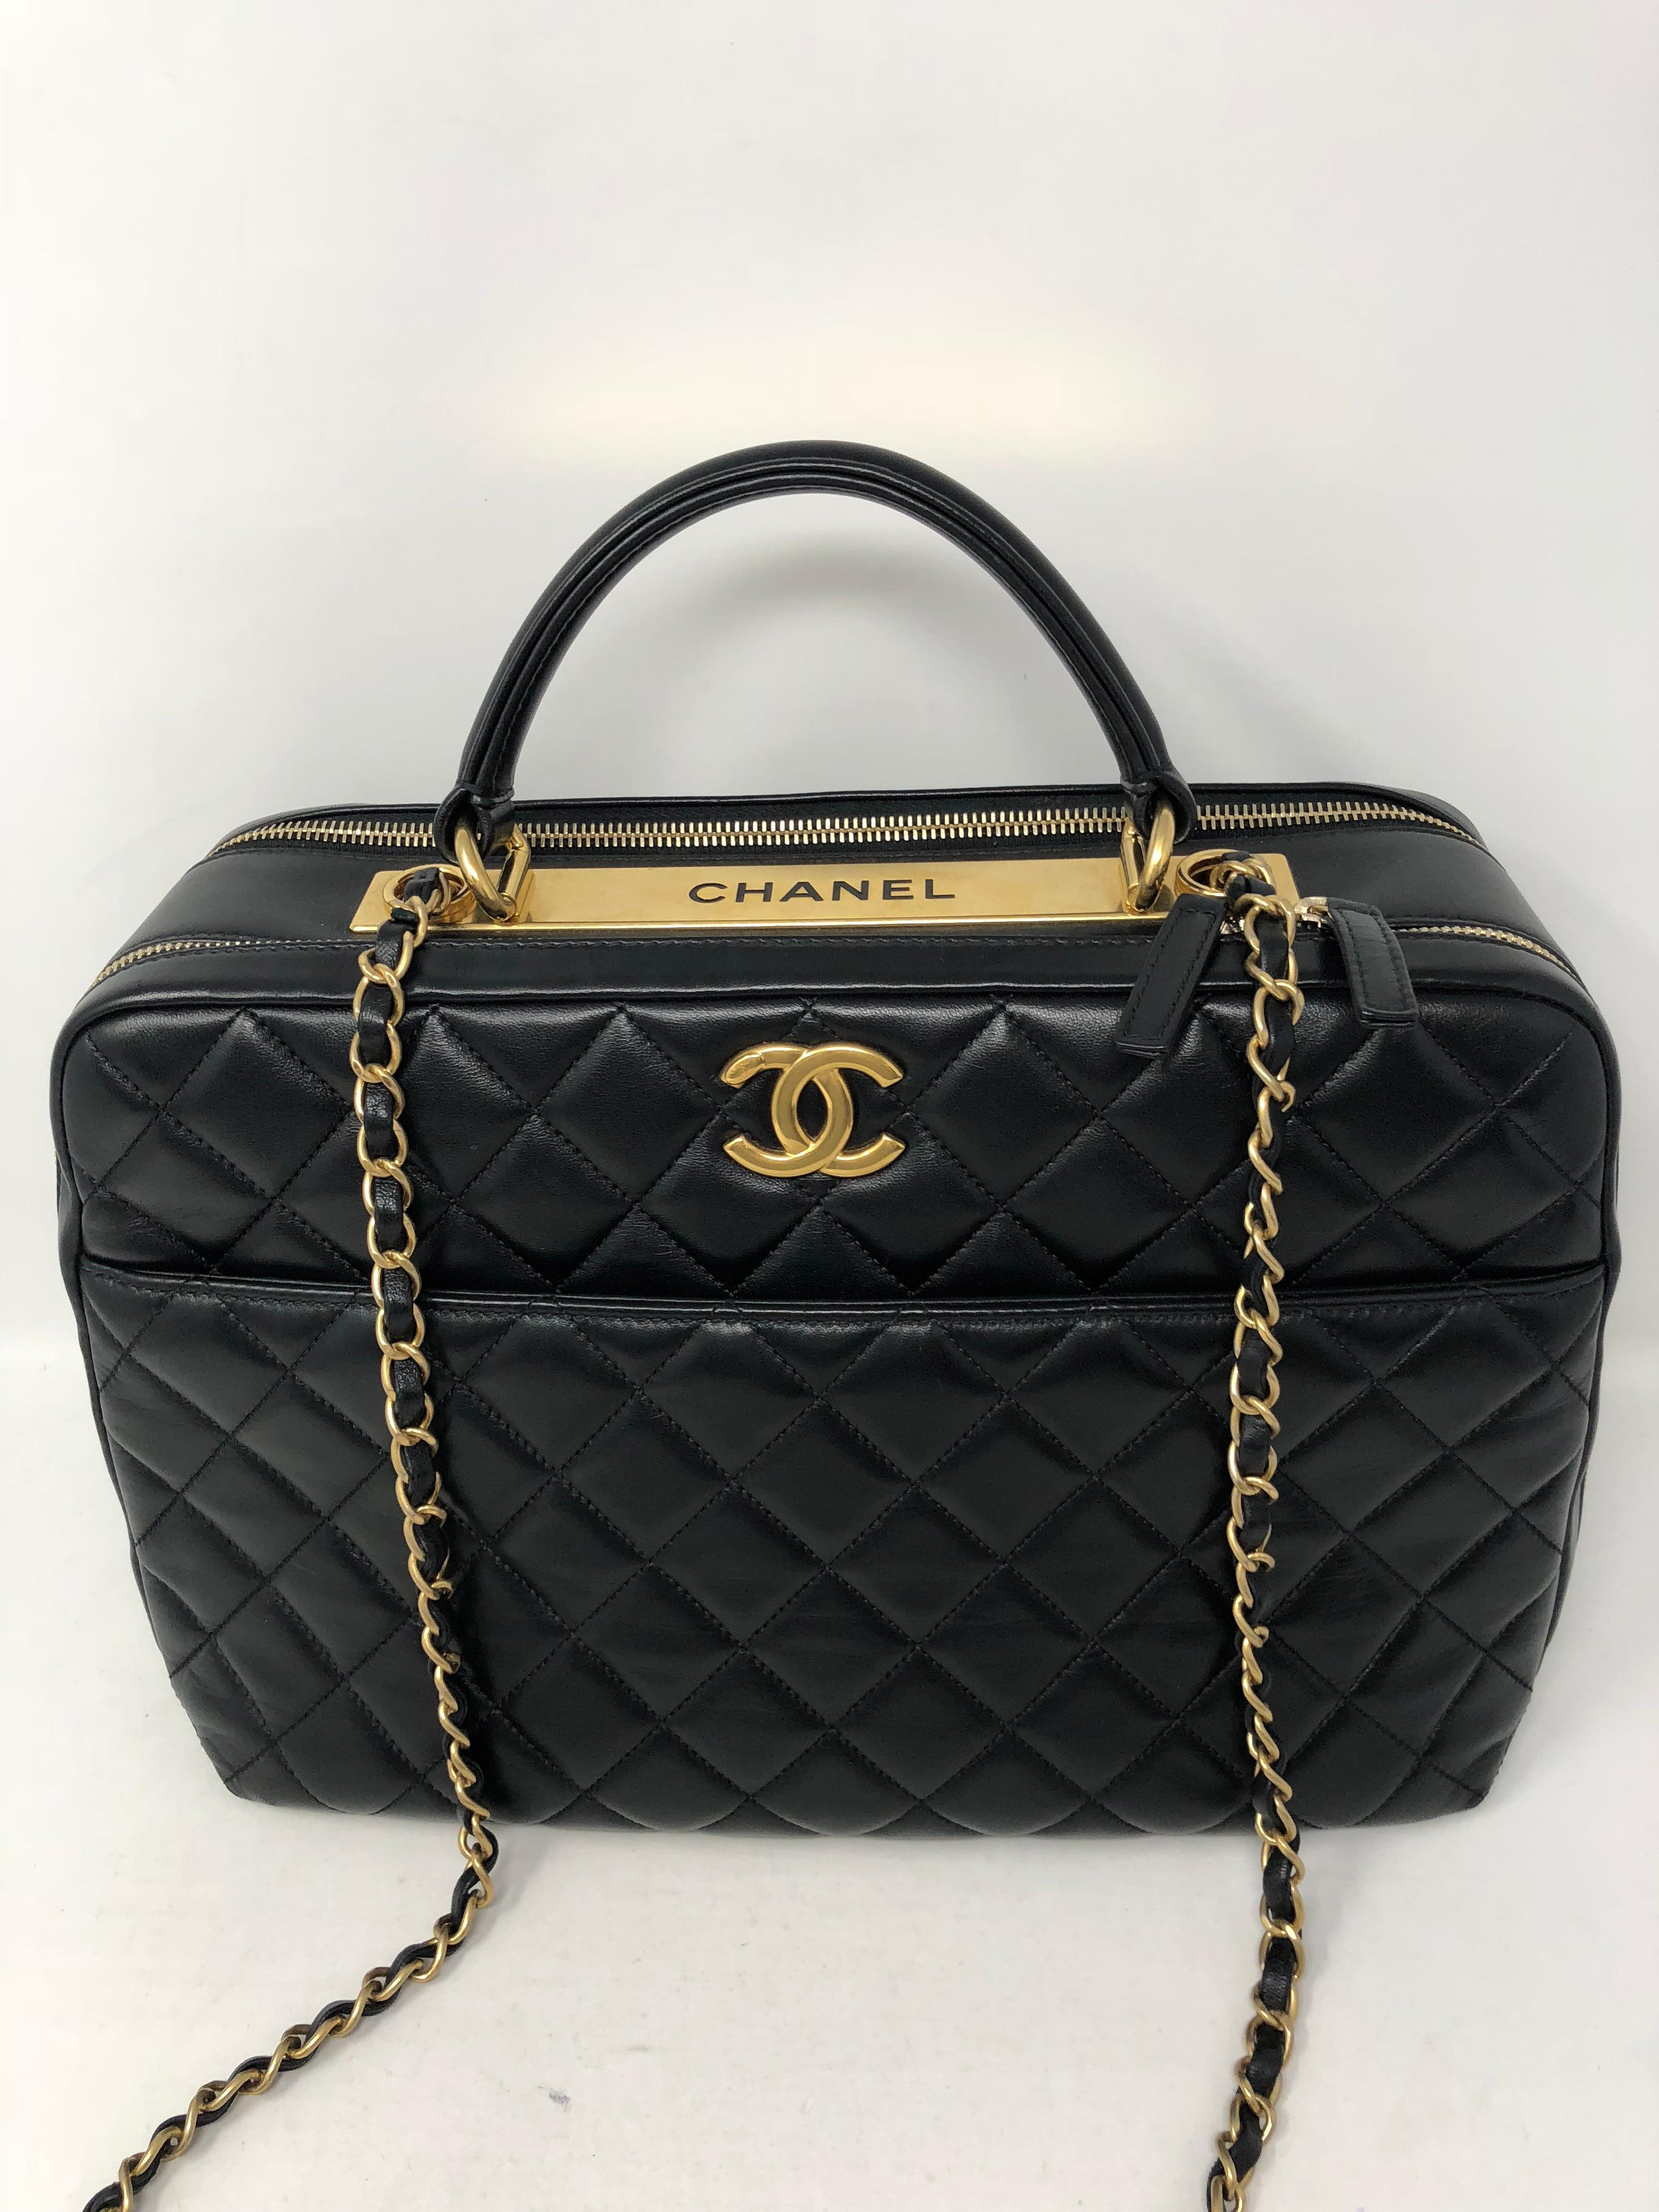 Chanel Black Trendy CC Bowling Bag with gold hardware. Quilted lambskin leather in large size bag with gold Chanel plate on top with CC on front. Has 2 size straps to be worn multiple ways. Never used, like new condition. Unique style and a lot of